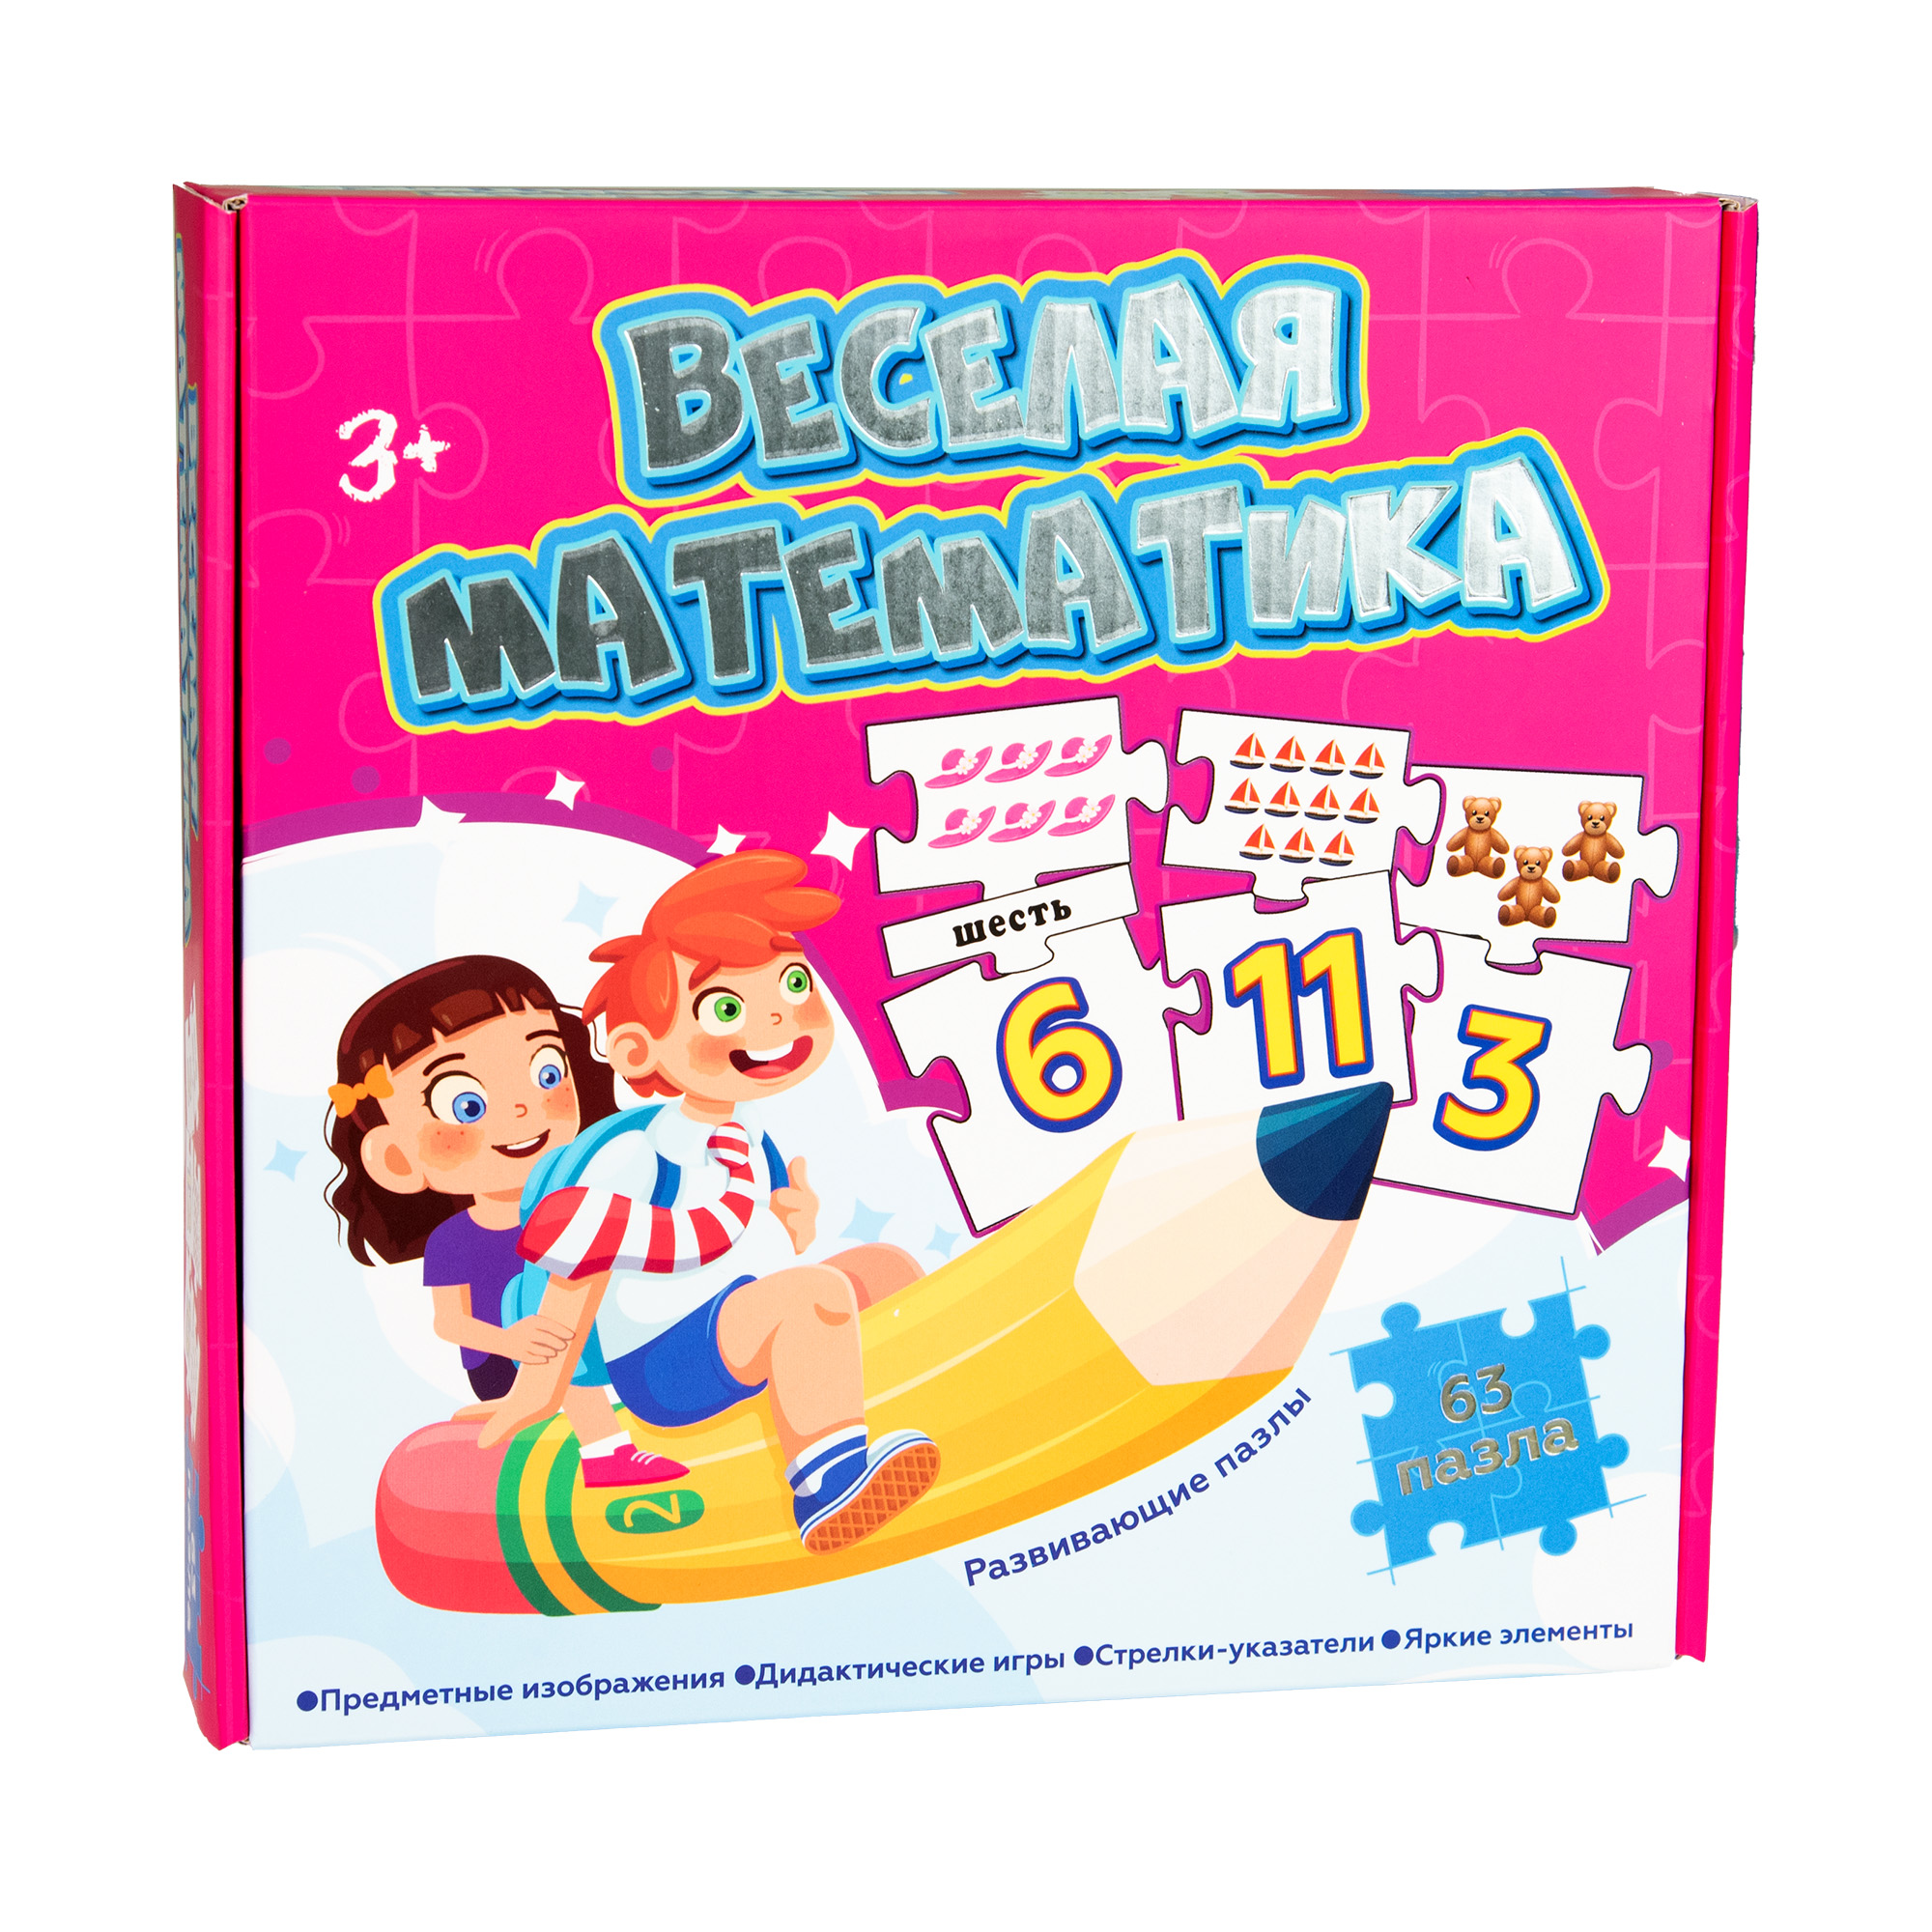 Puzzles "Merry Math" (Russian) (00312)